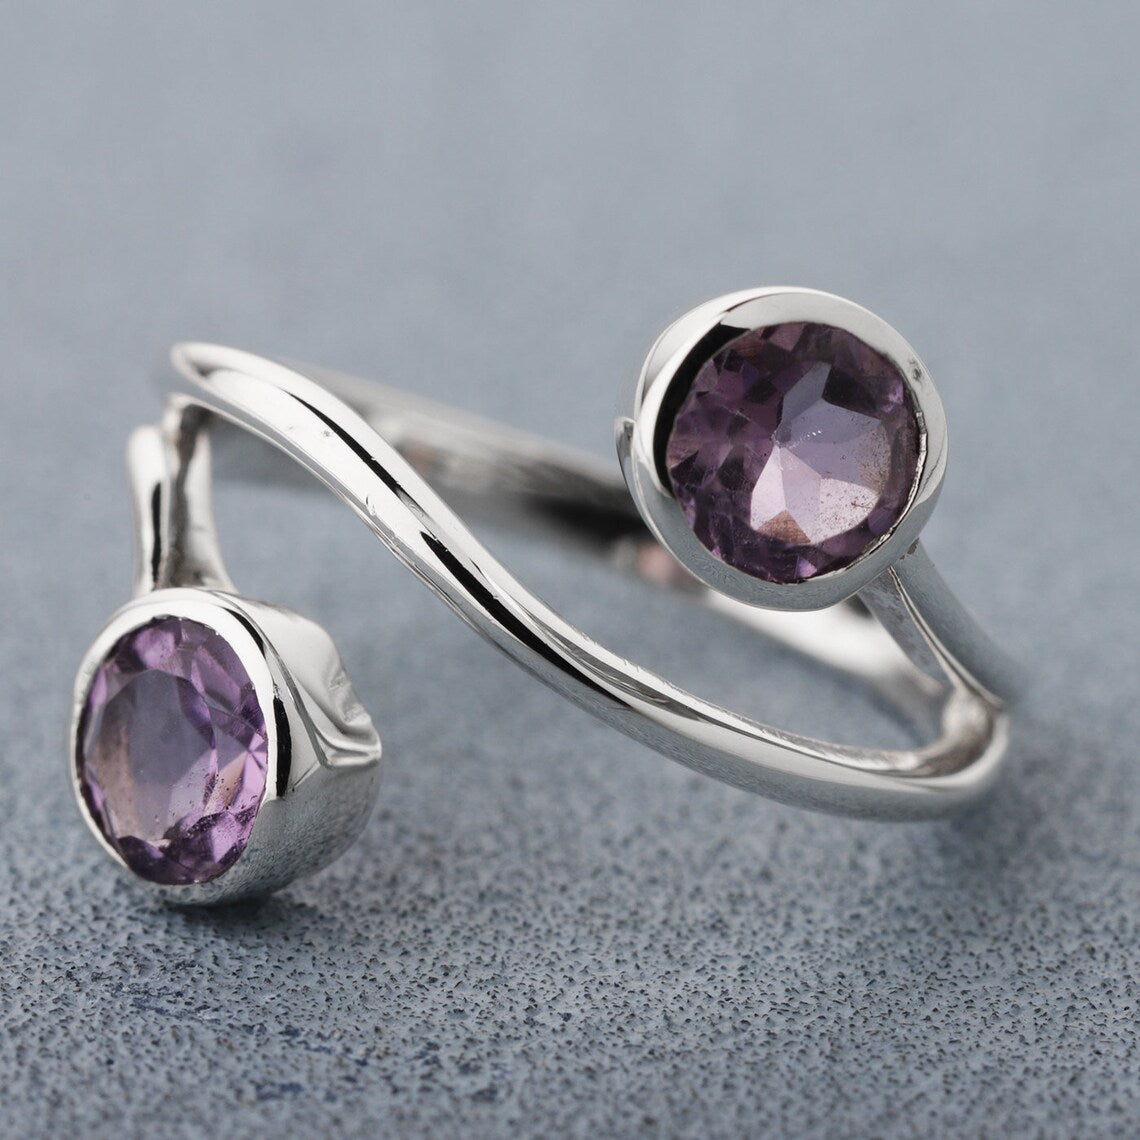 Purple Amethyst stack Ring Round amethyst stacking Ring -18k Gold Plated -Solid Silver Ring- Unique Ring Designer Ring -Women Stylish Ring